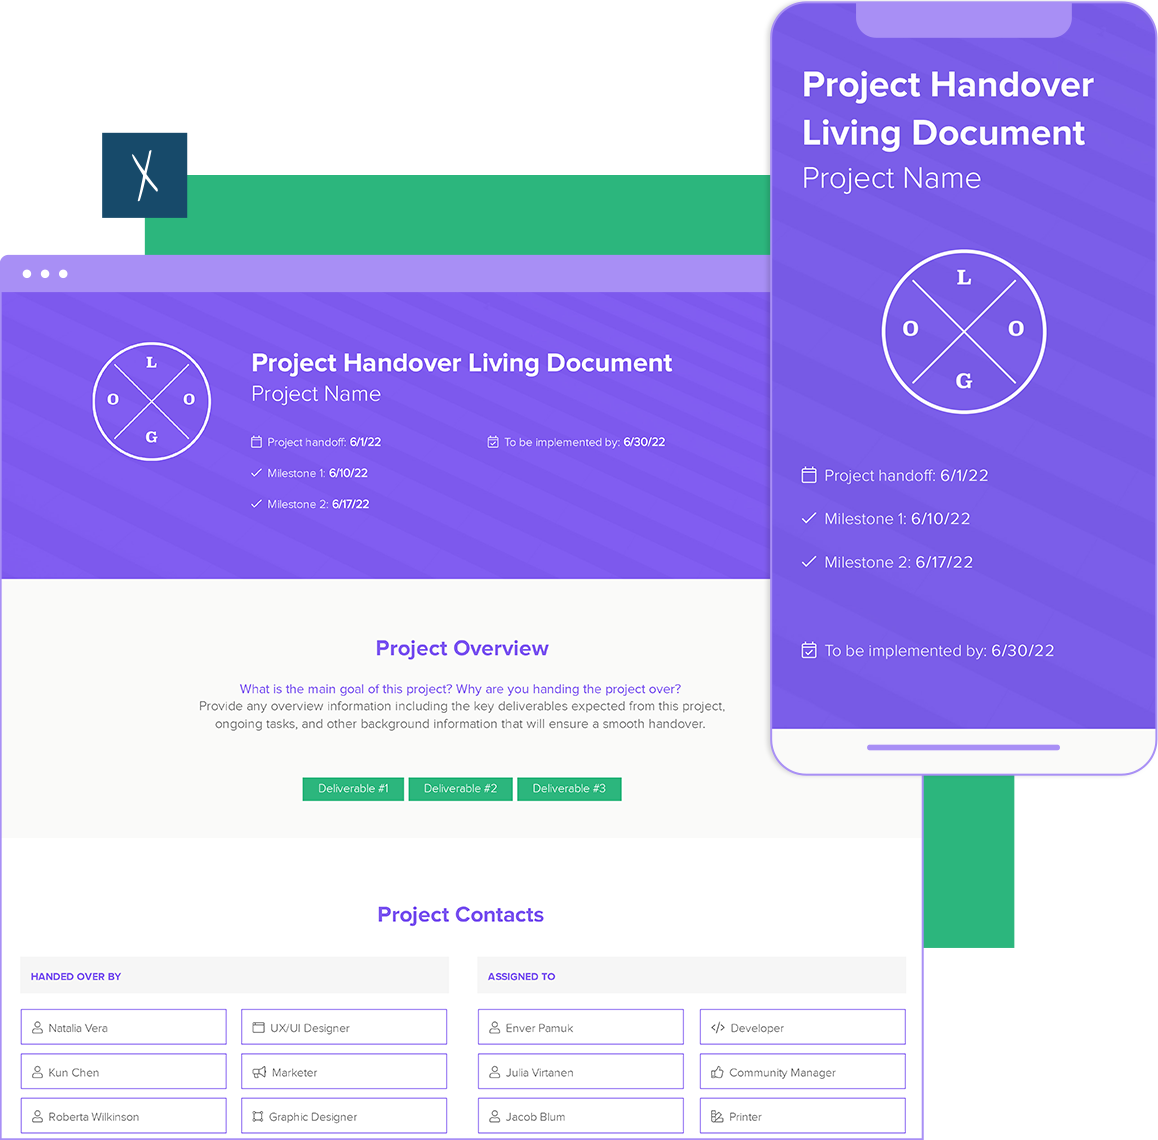 Project Handover Living Document Template  | Desktop and Mobile Views